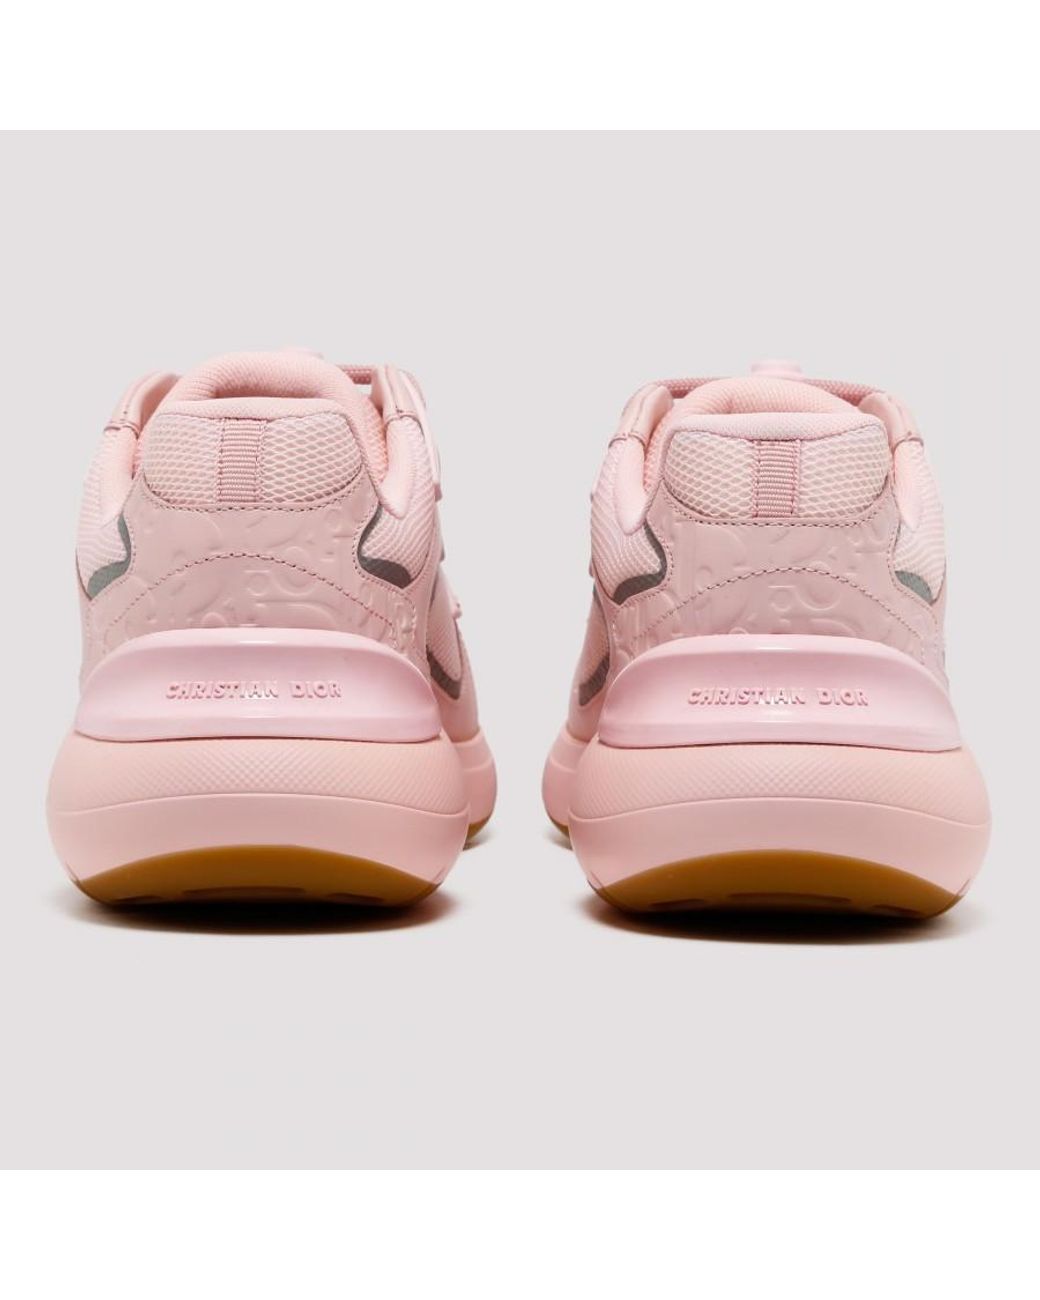 Dior Homme B24 Pale Pink Sneakers for Men | Lyst